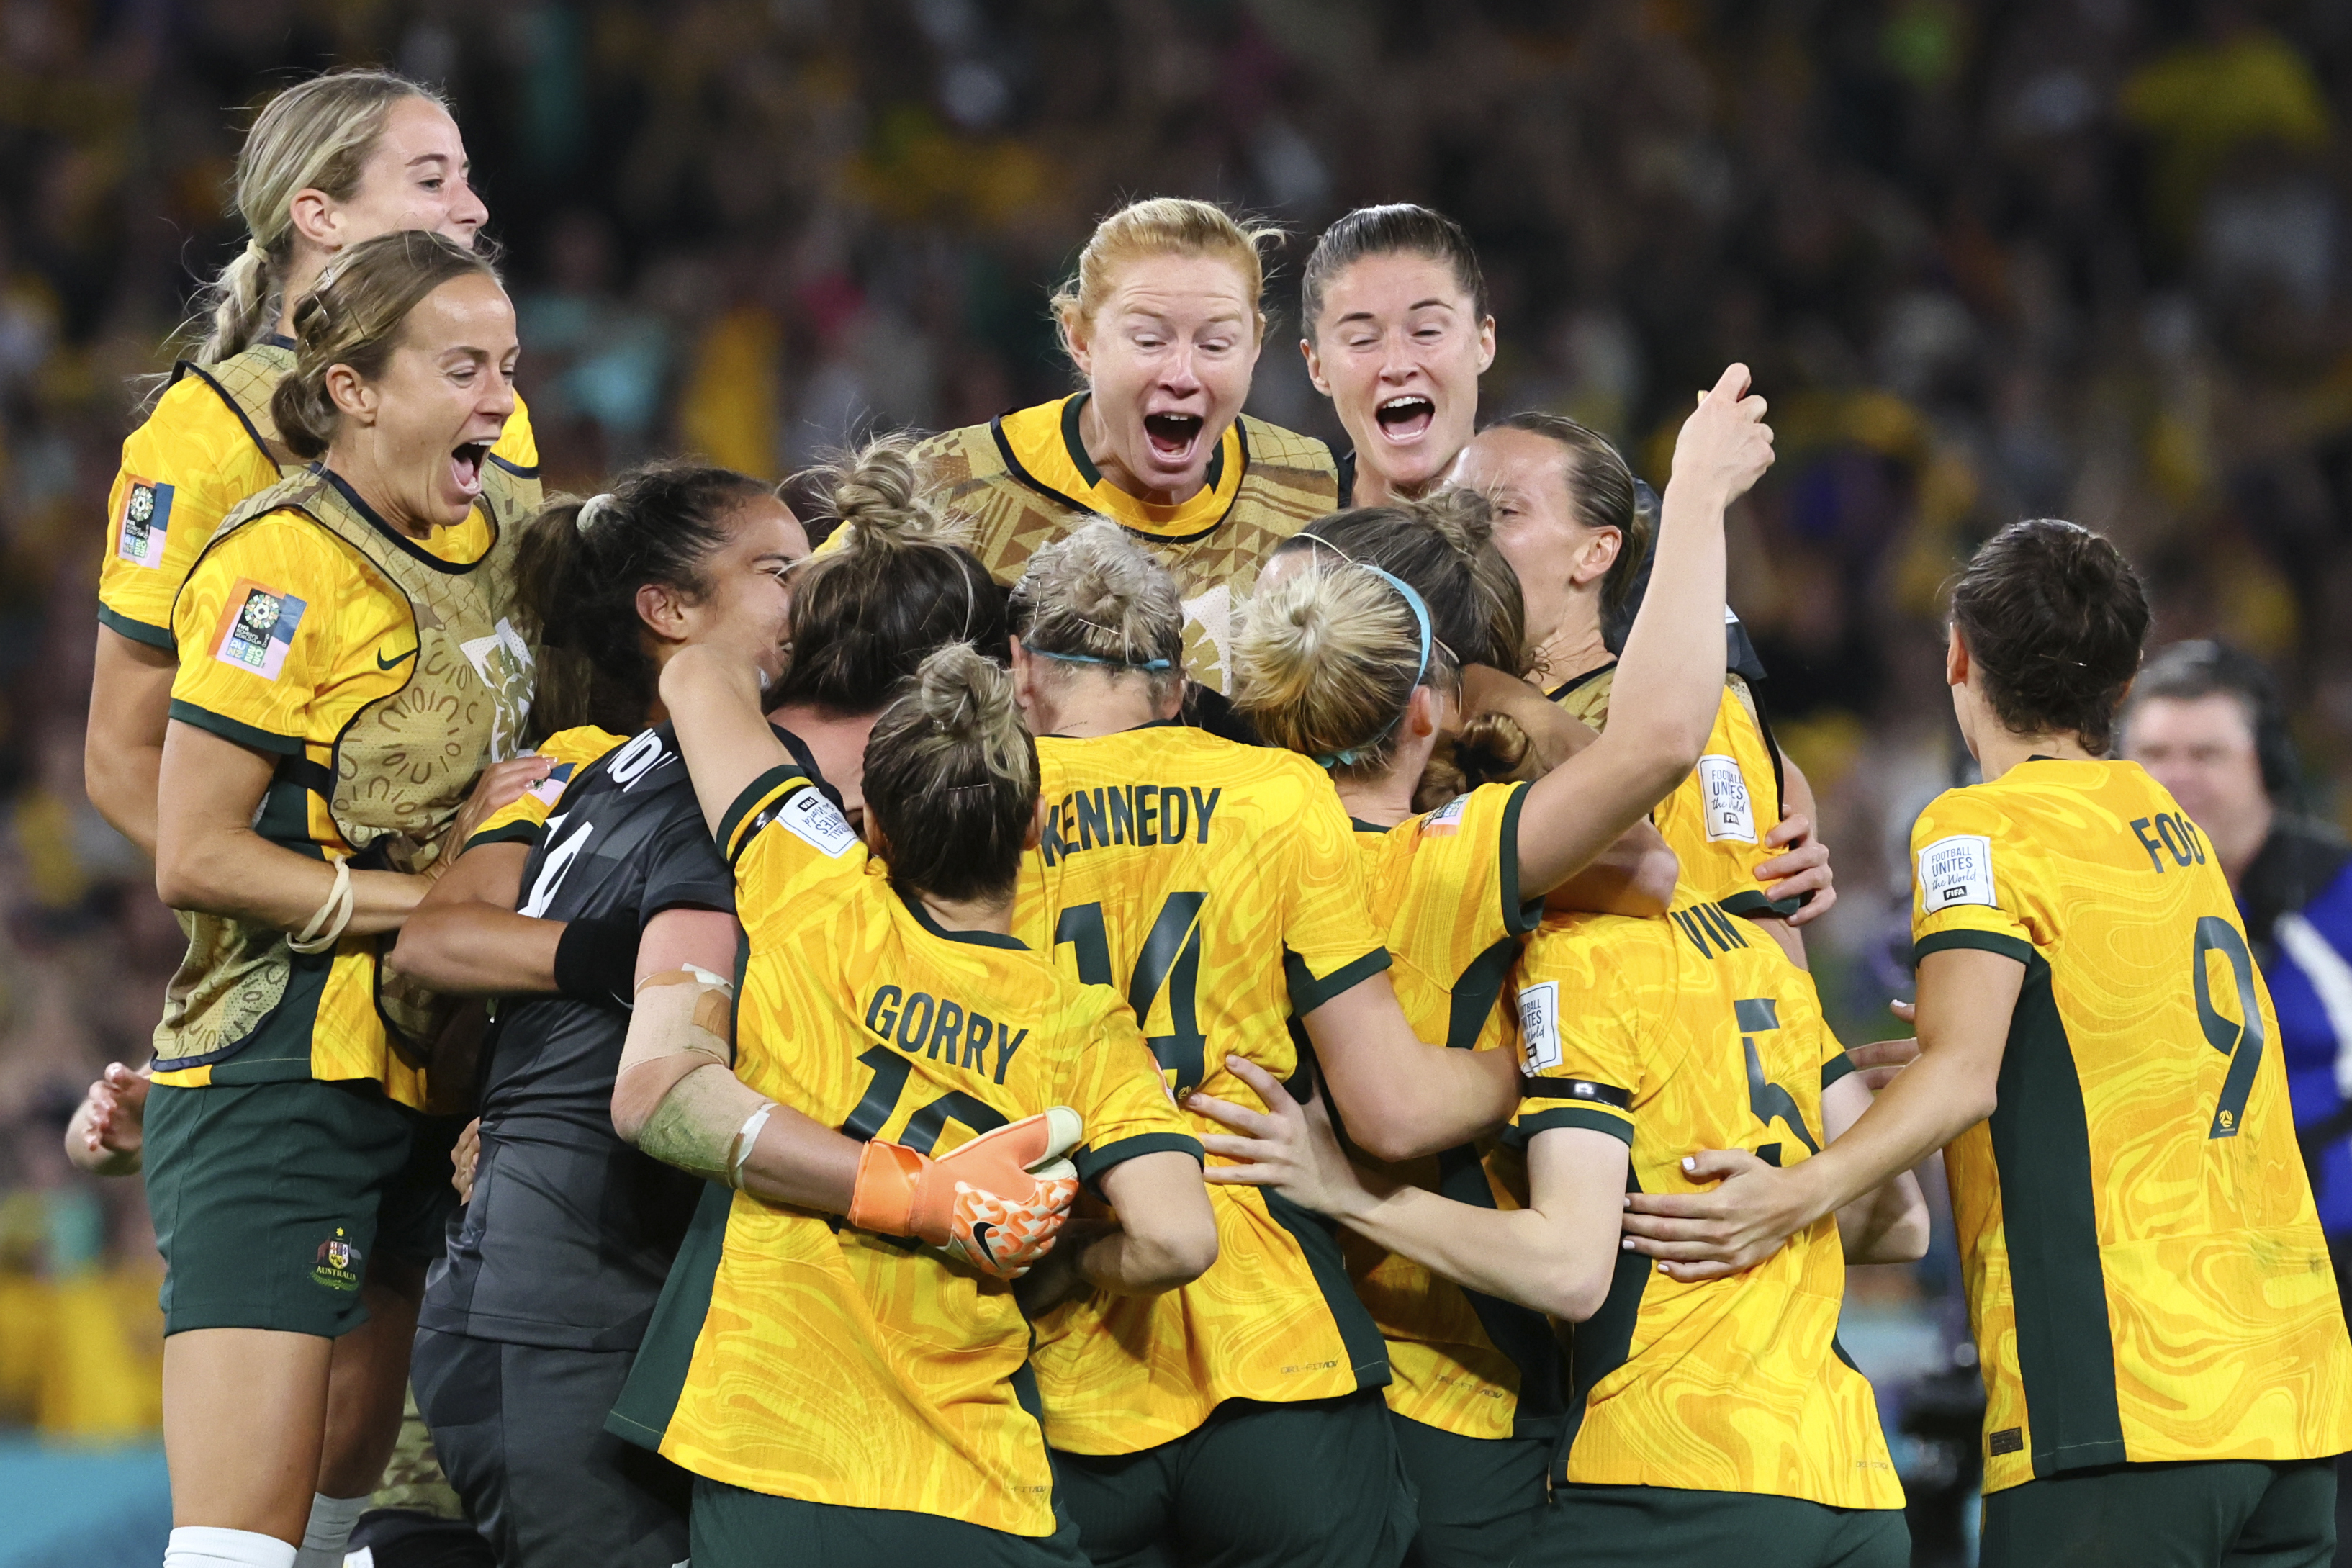 Australia Beats France on Penalties to Reach World Cup Semifinals